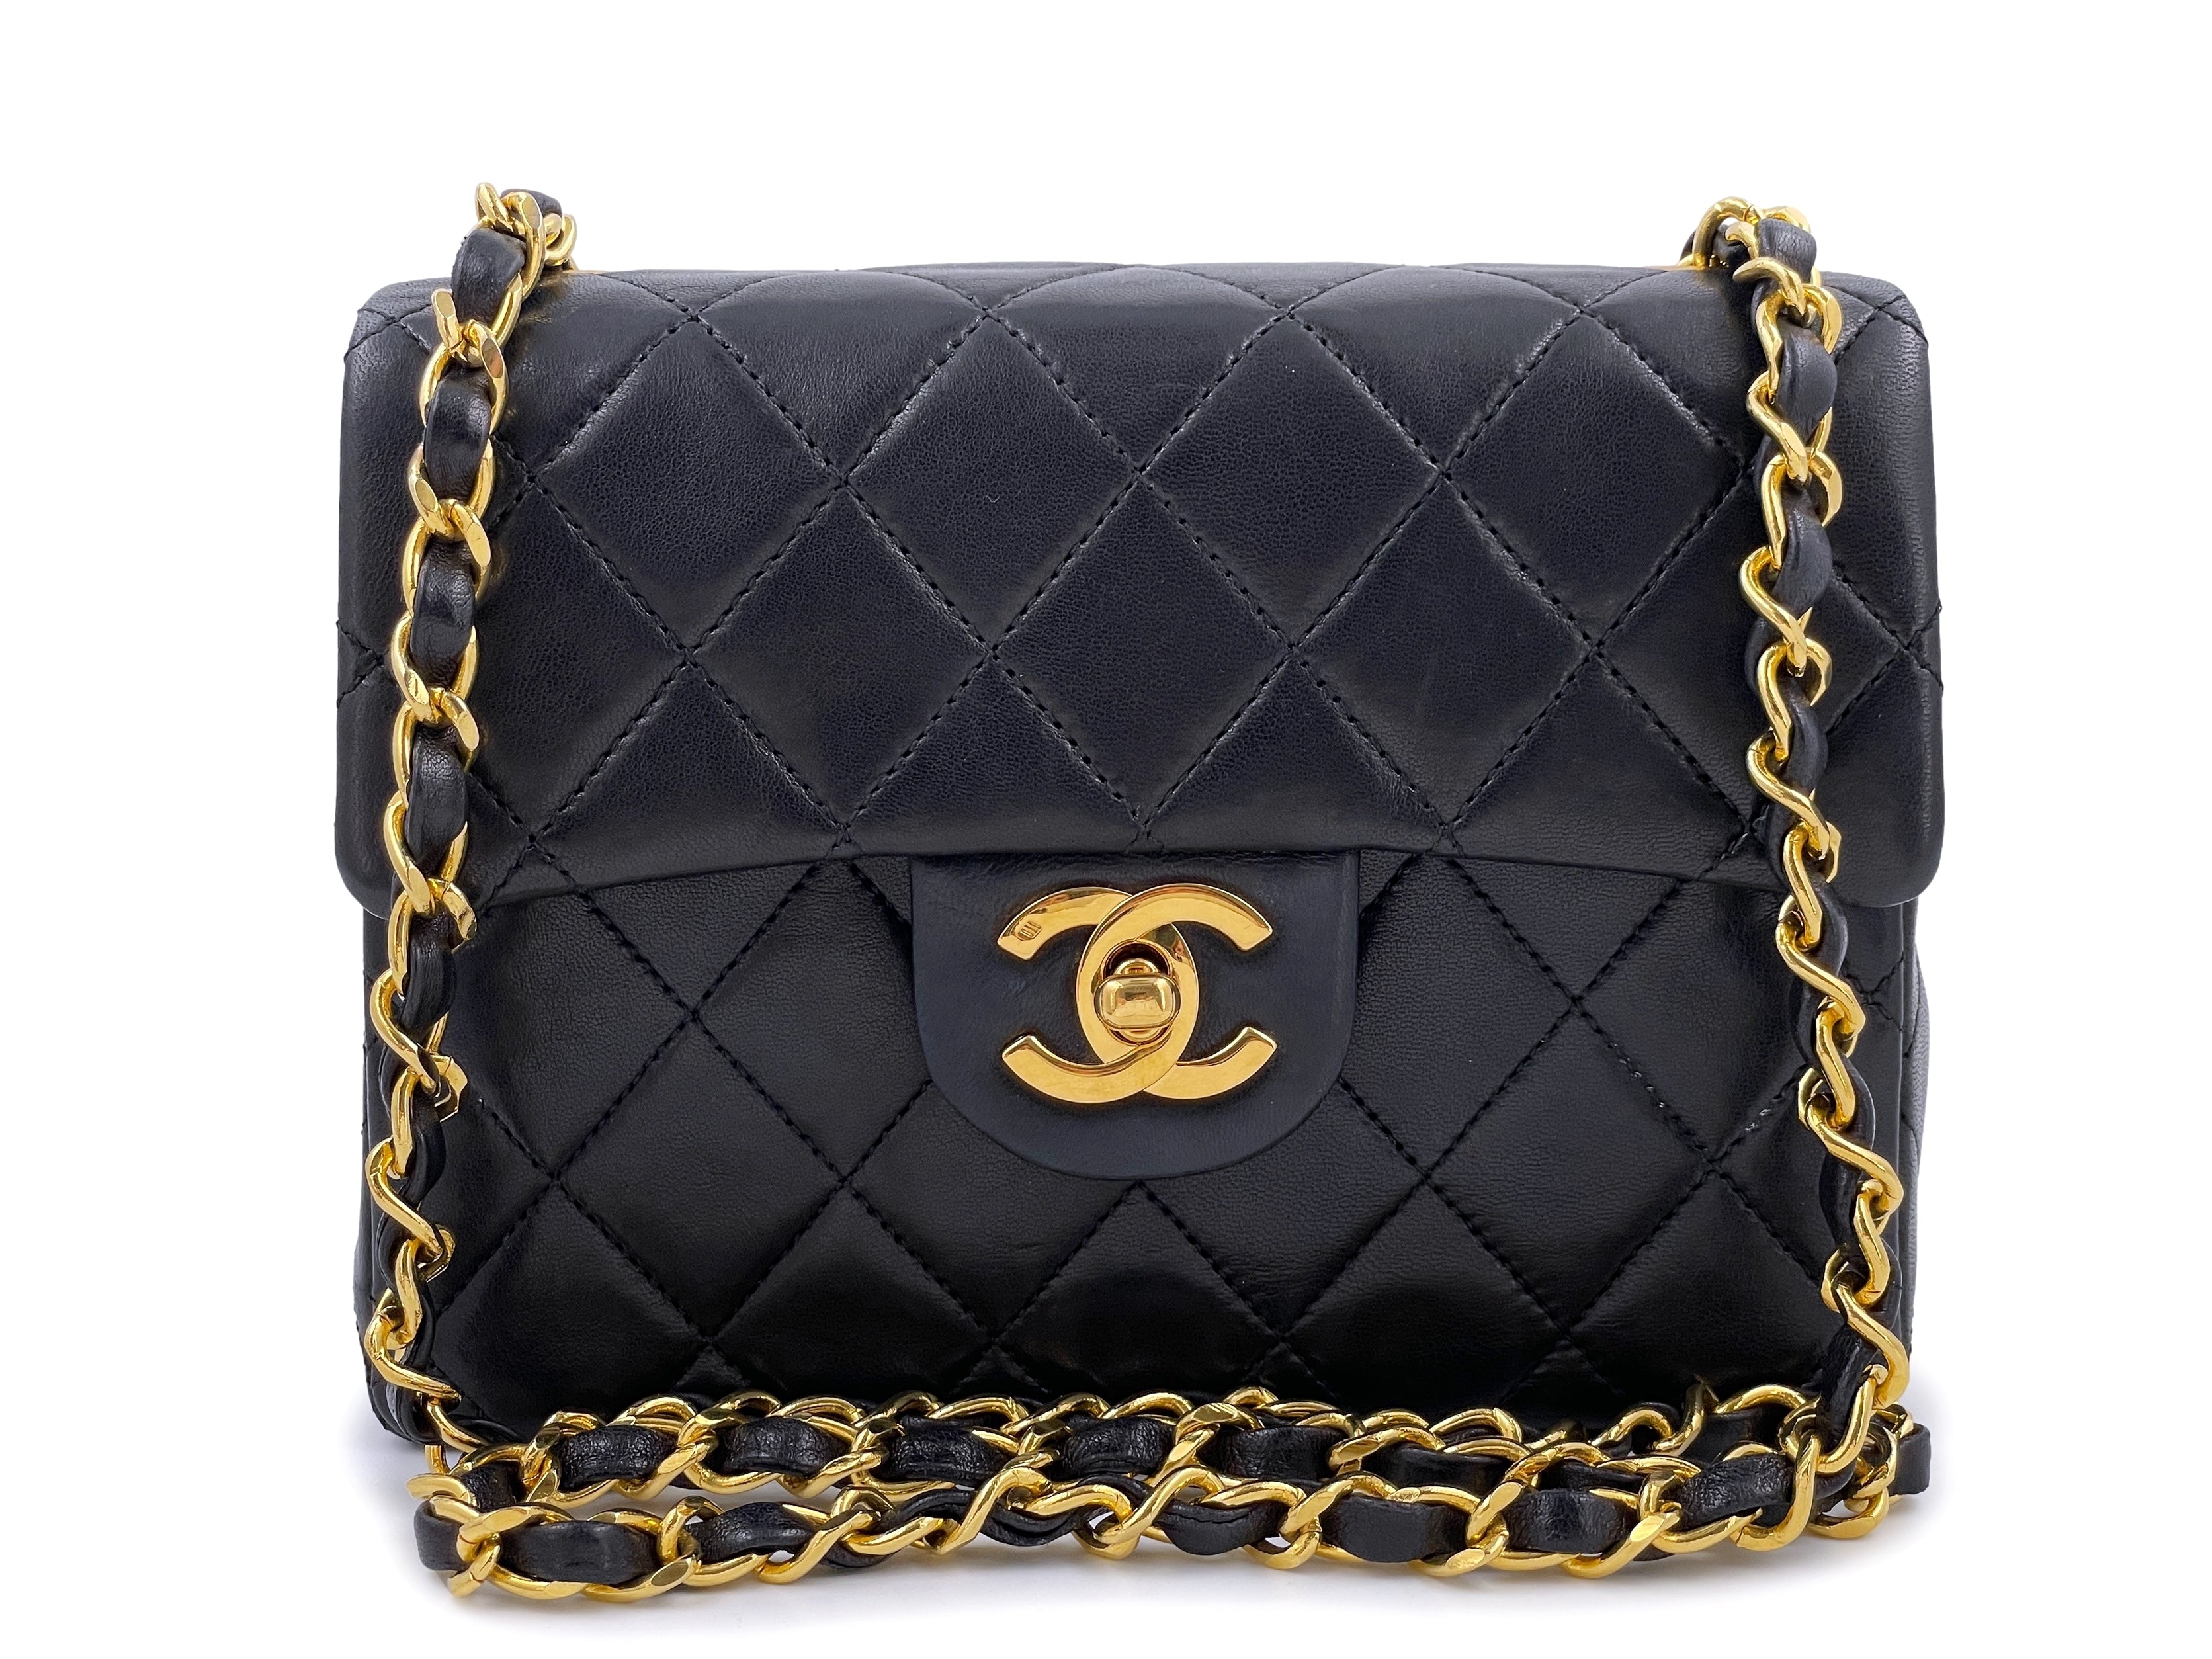 A NAVY LAMBSKIN LEATHER SMALL DOUBLE FLAP BAG, CHANEL, 1989-1991